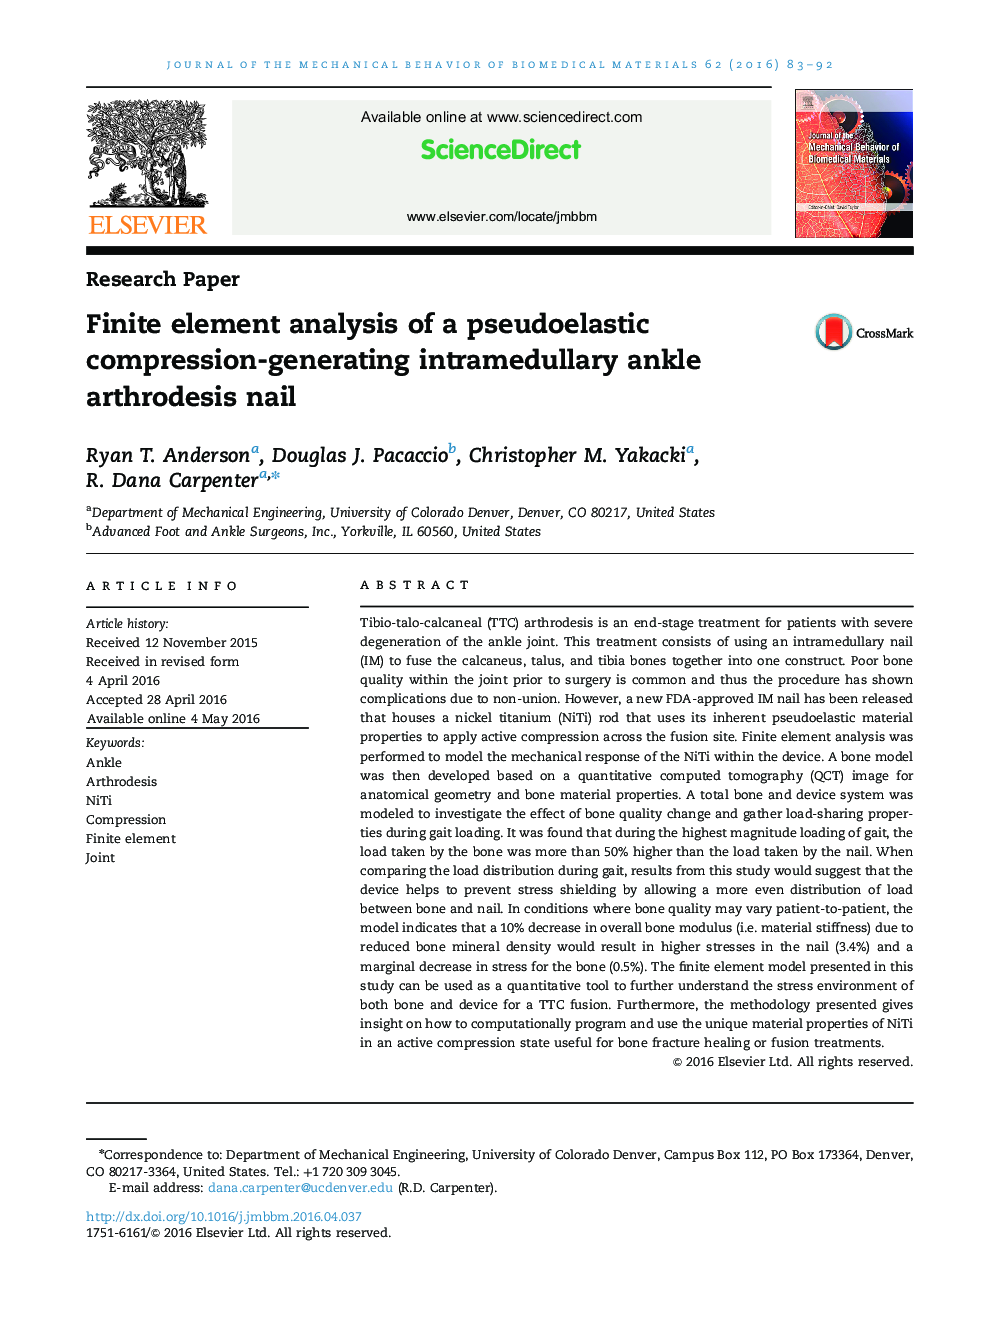 Finite element analysis of a pseudoelastic compression-generating intramedullary ankle arthrodesis nail